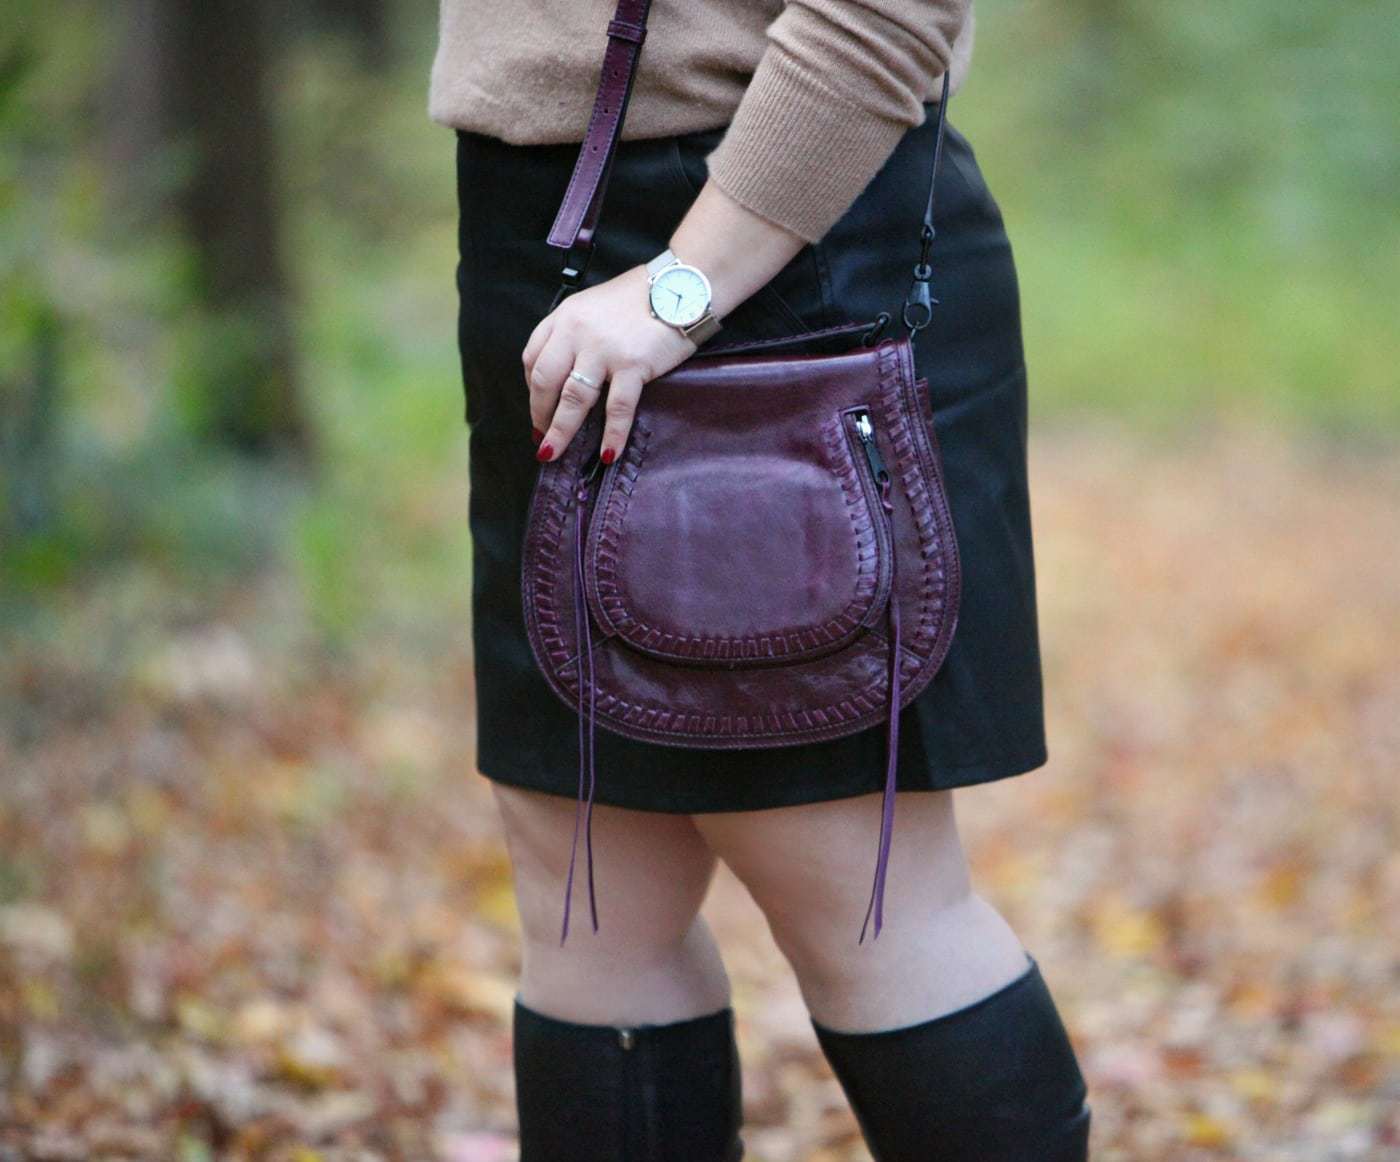 Wardrobe Oxygen in a Halogen cashmere sweater, LOFT faux leather skirt, Ros Hommerson wide calf boots, and Rebecca Minkoff Vanity bag